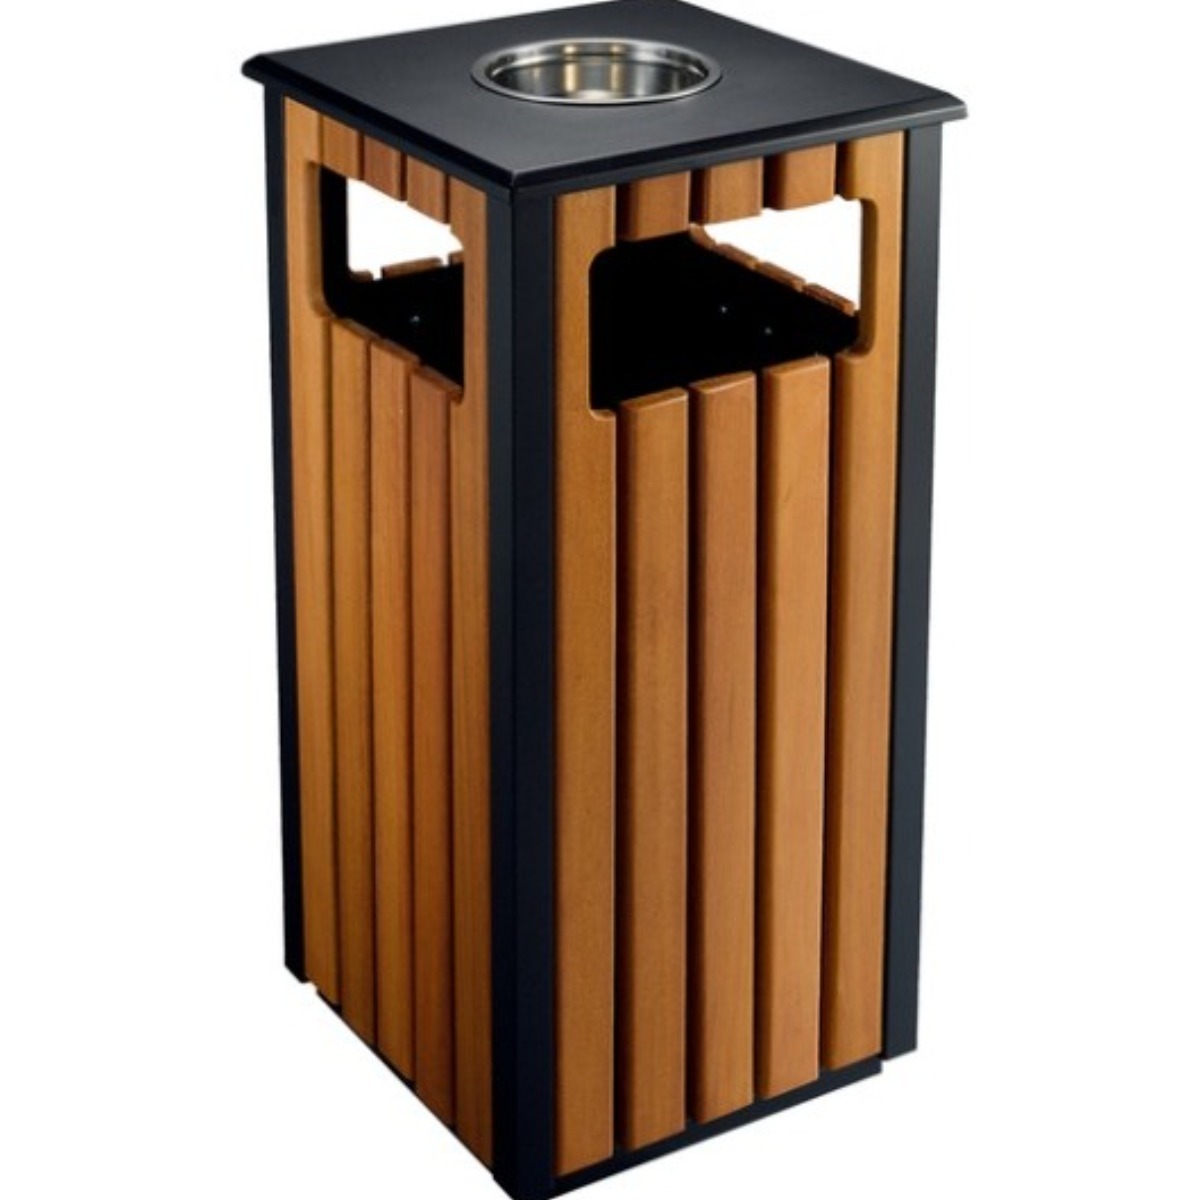 AB-520 Wood Open Space Trash Can